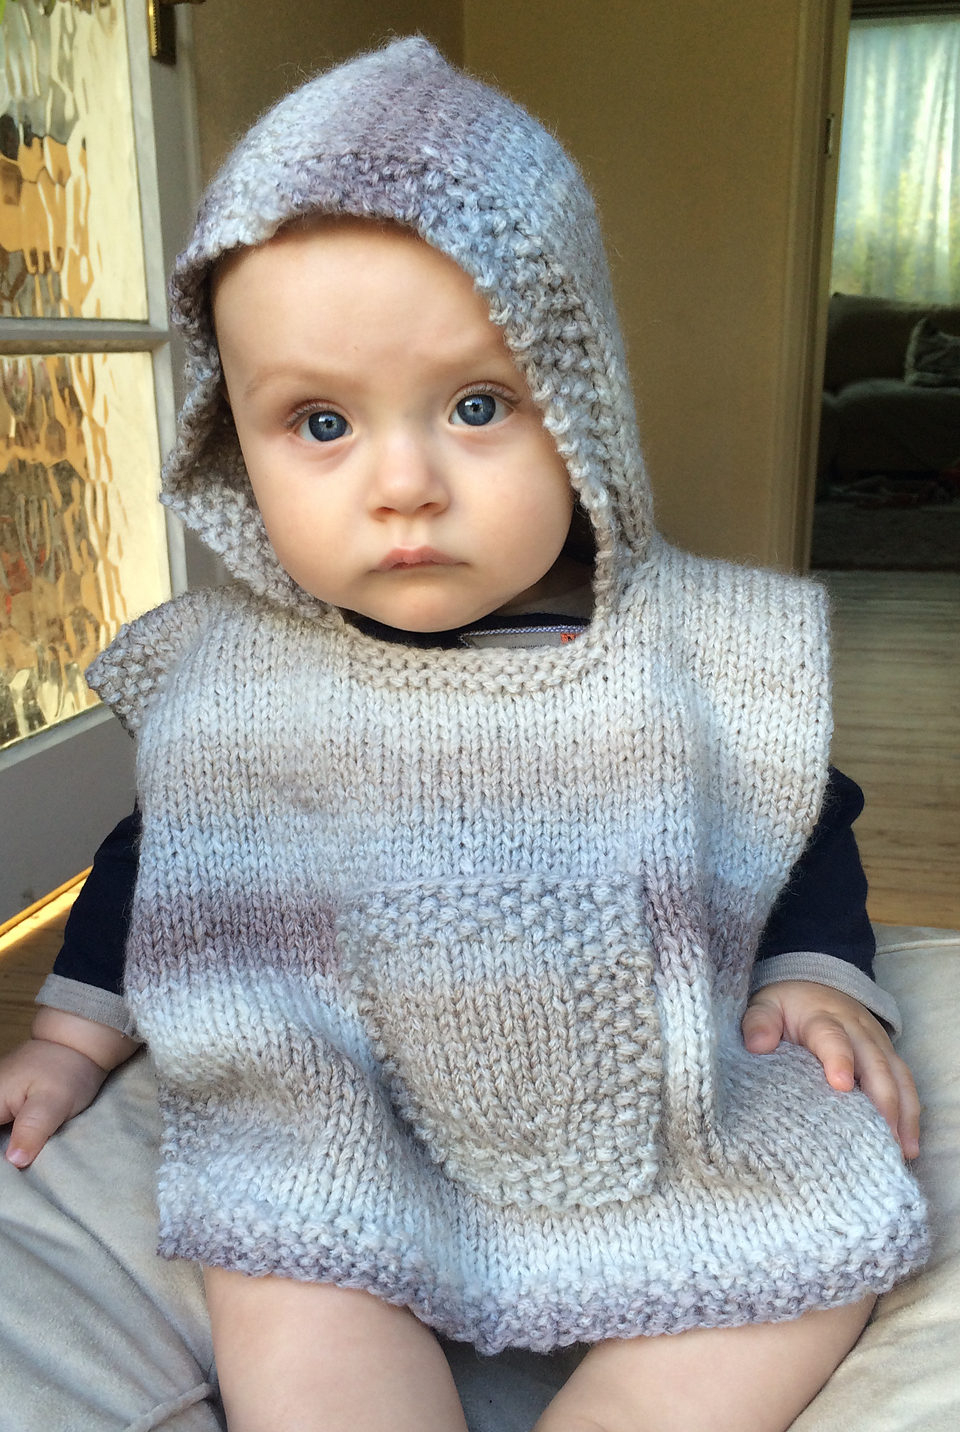 Free Knitting Patterns For Ponchos Or Capes Ponchos For Babies And Children In The Loop Knitting